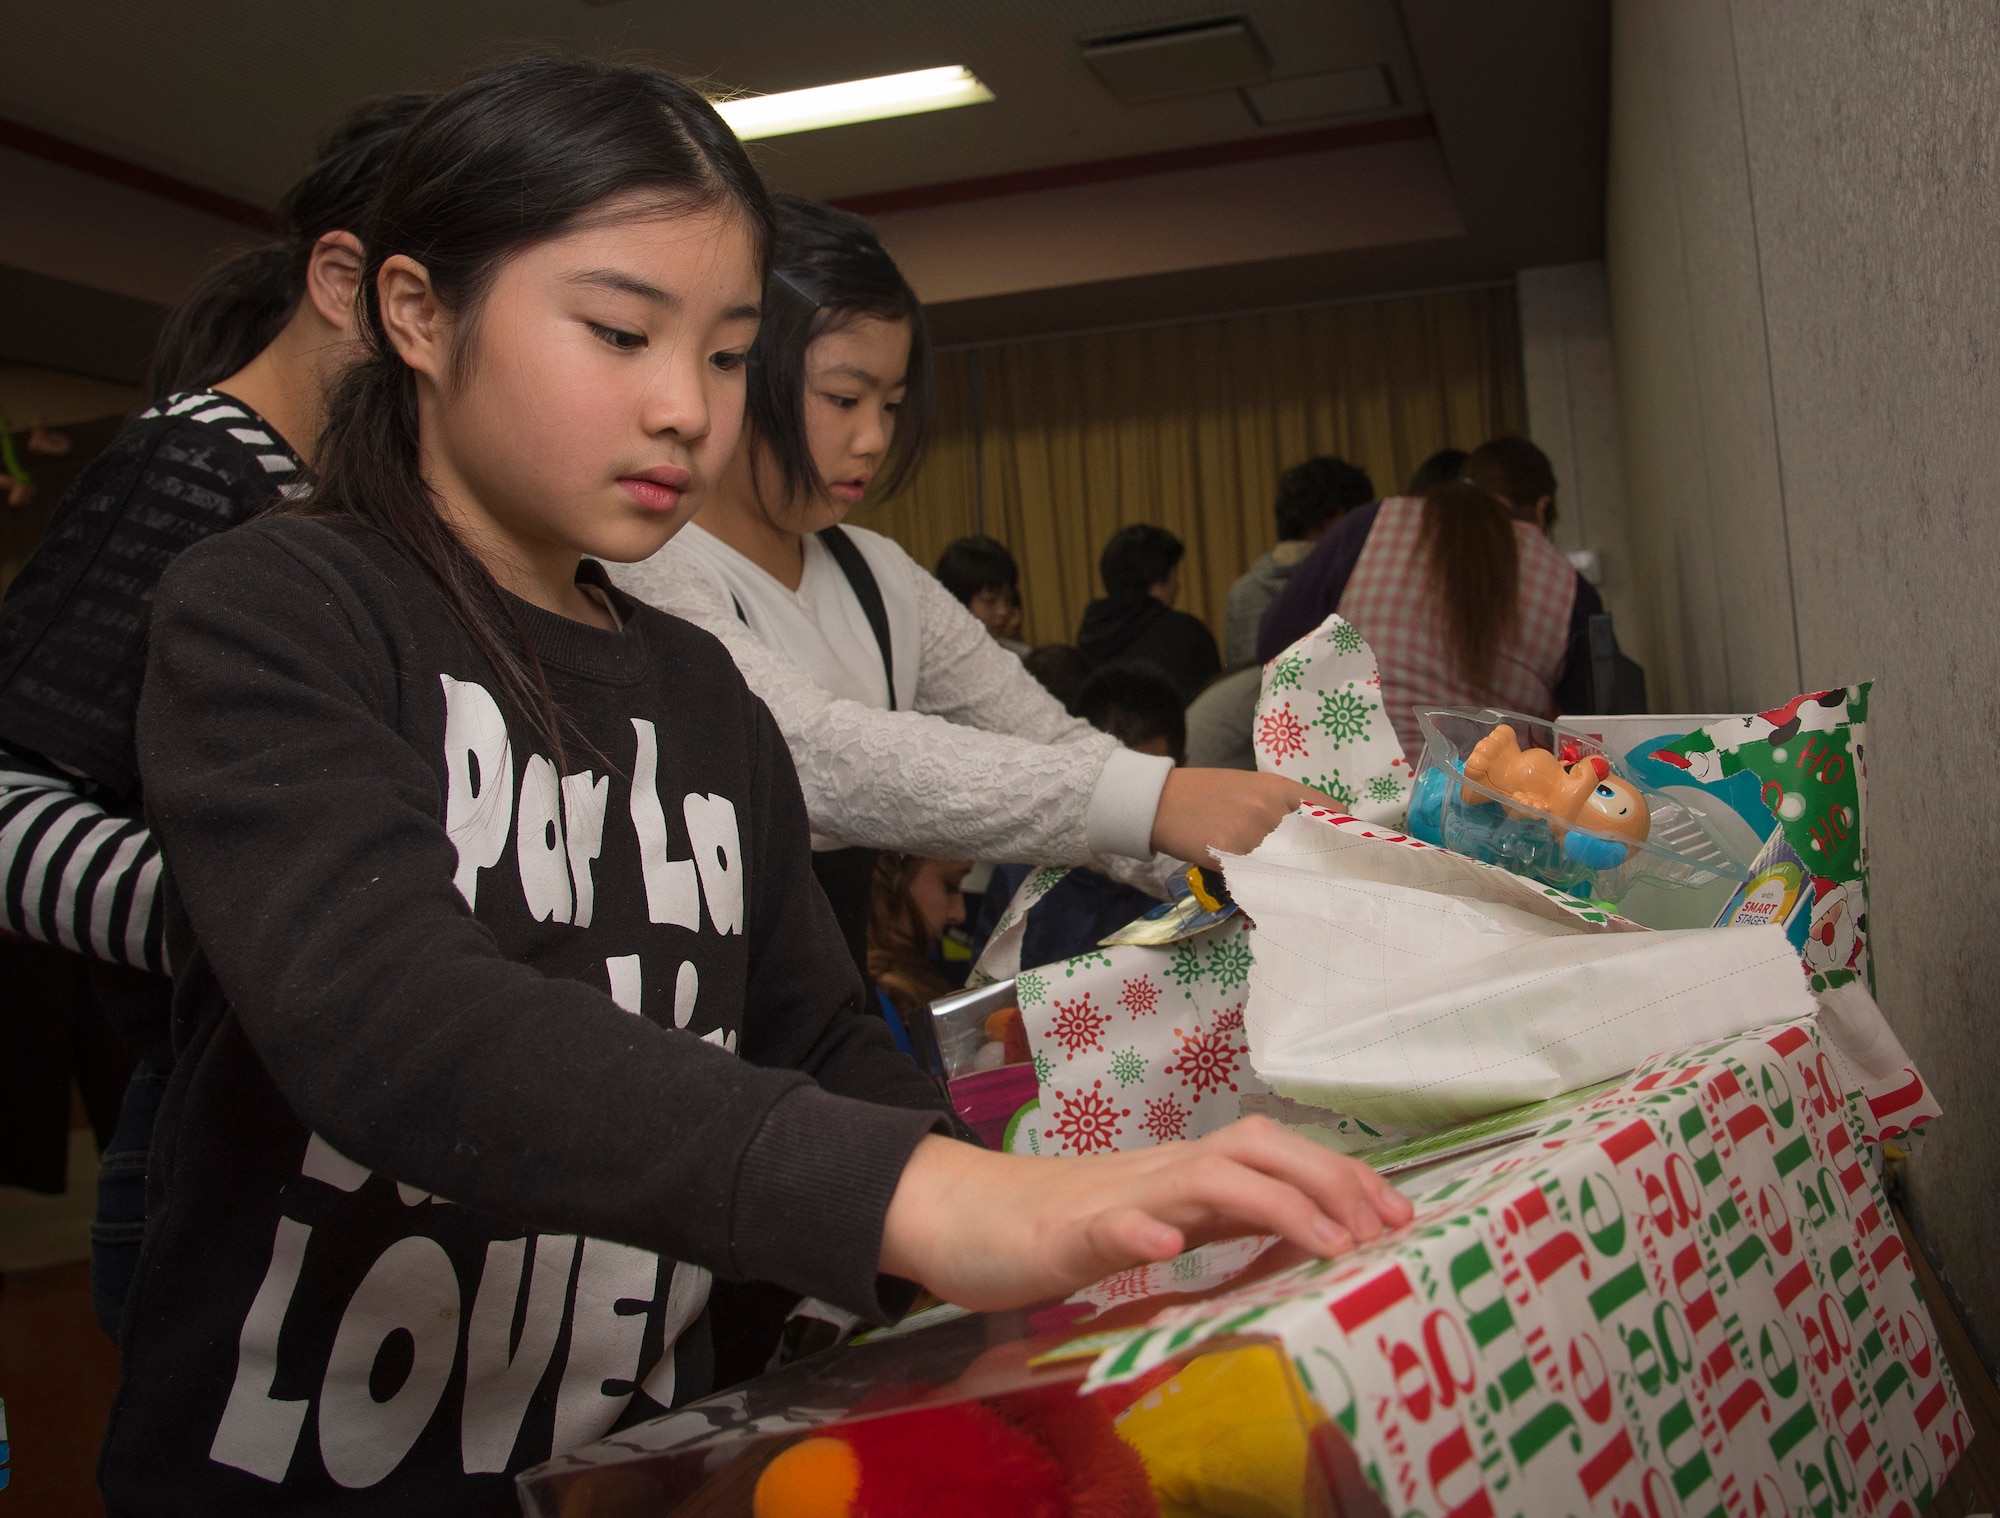 Hoshimi Kohaneo, a Shichinohe Orphange member, unwarps a present received from Misawa Air Force Base Airmen at Shichinohe, Japan, Dec. 23, 2016. The orphanage holds 41 orphans with approximately six caretakers staying overnight to guide them and ensure the group is ready for everyday activities like completing schoolwork. (U.S. Air Force photo by Airman 1st Class Sadie Colbert)